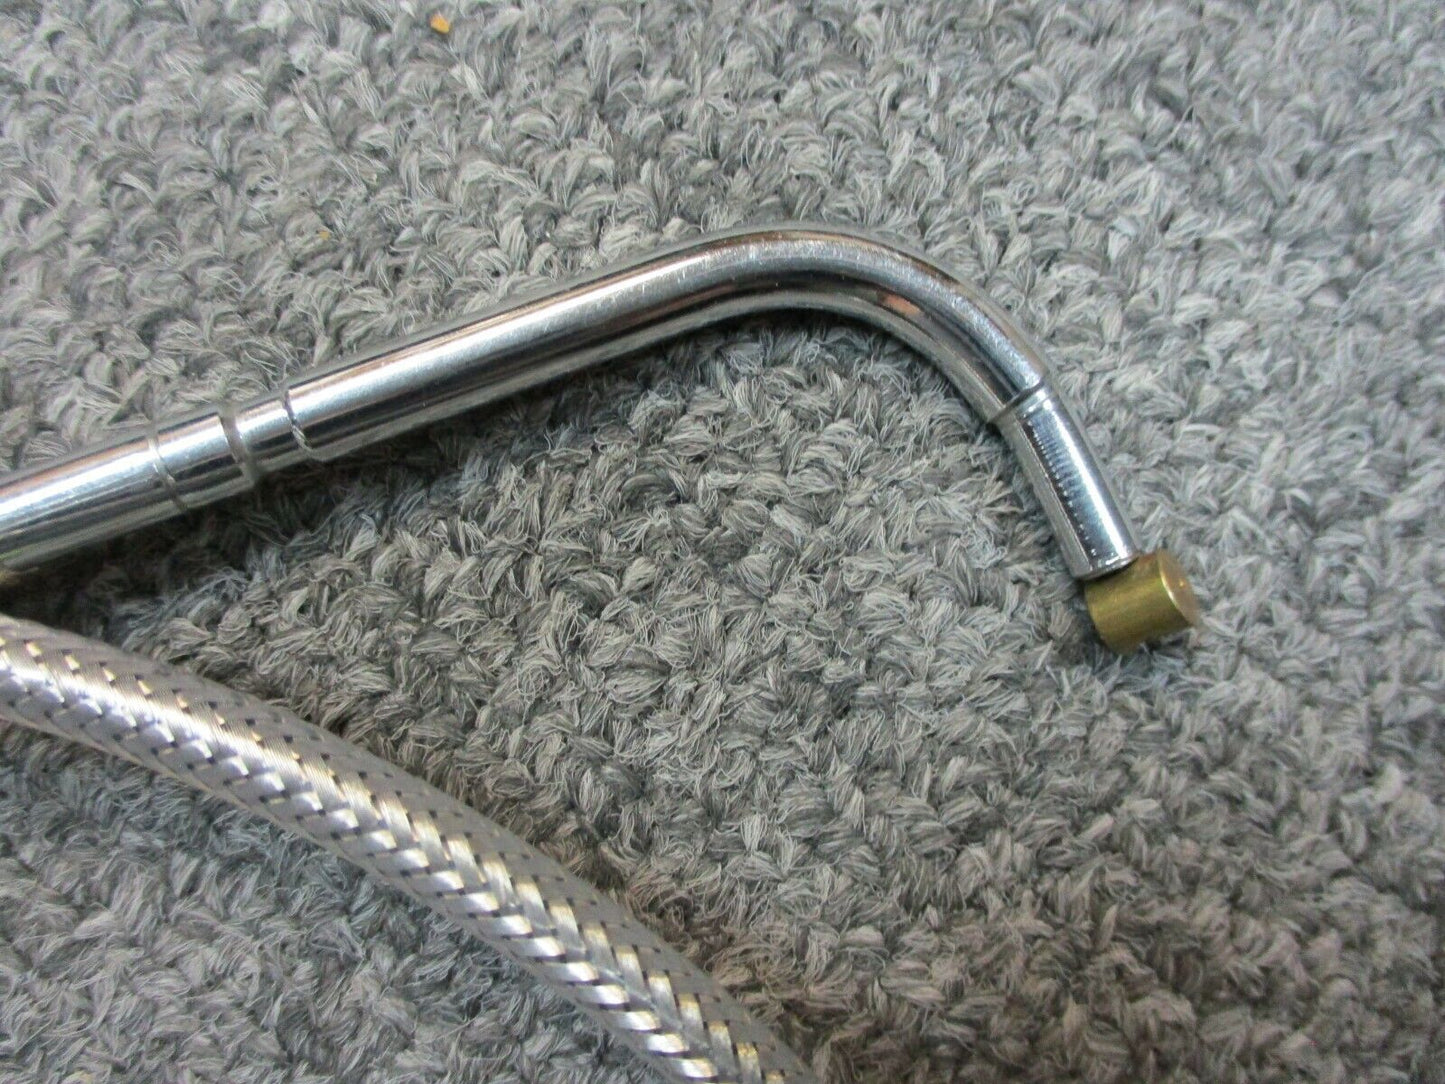 Stainless Braided Throttle Cable 34" 1996 Later 90 Degree fits Harley Davidson